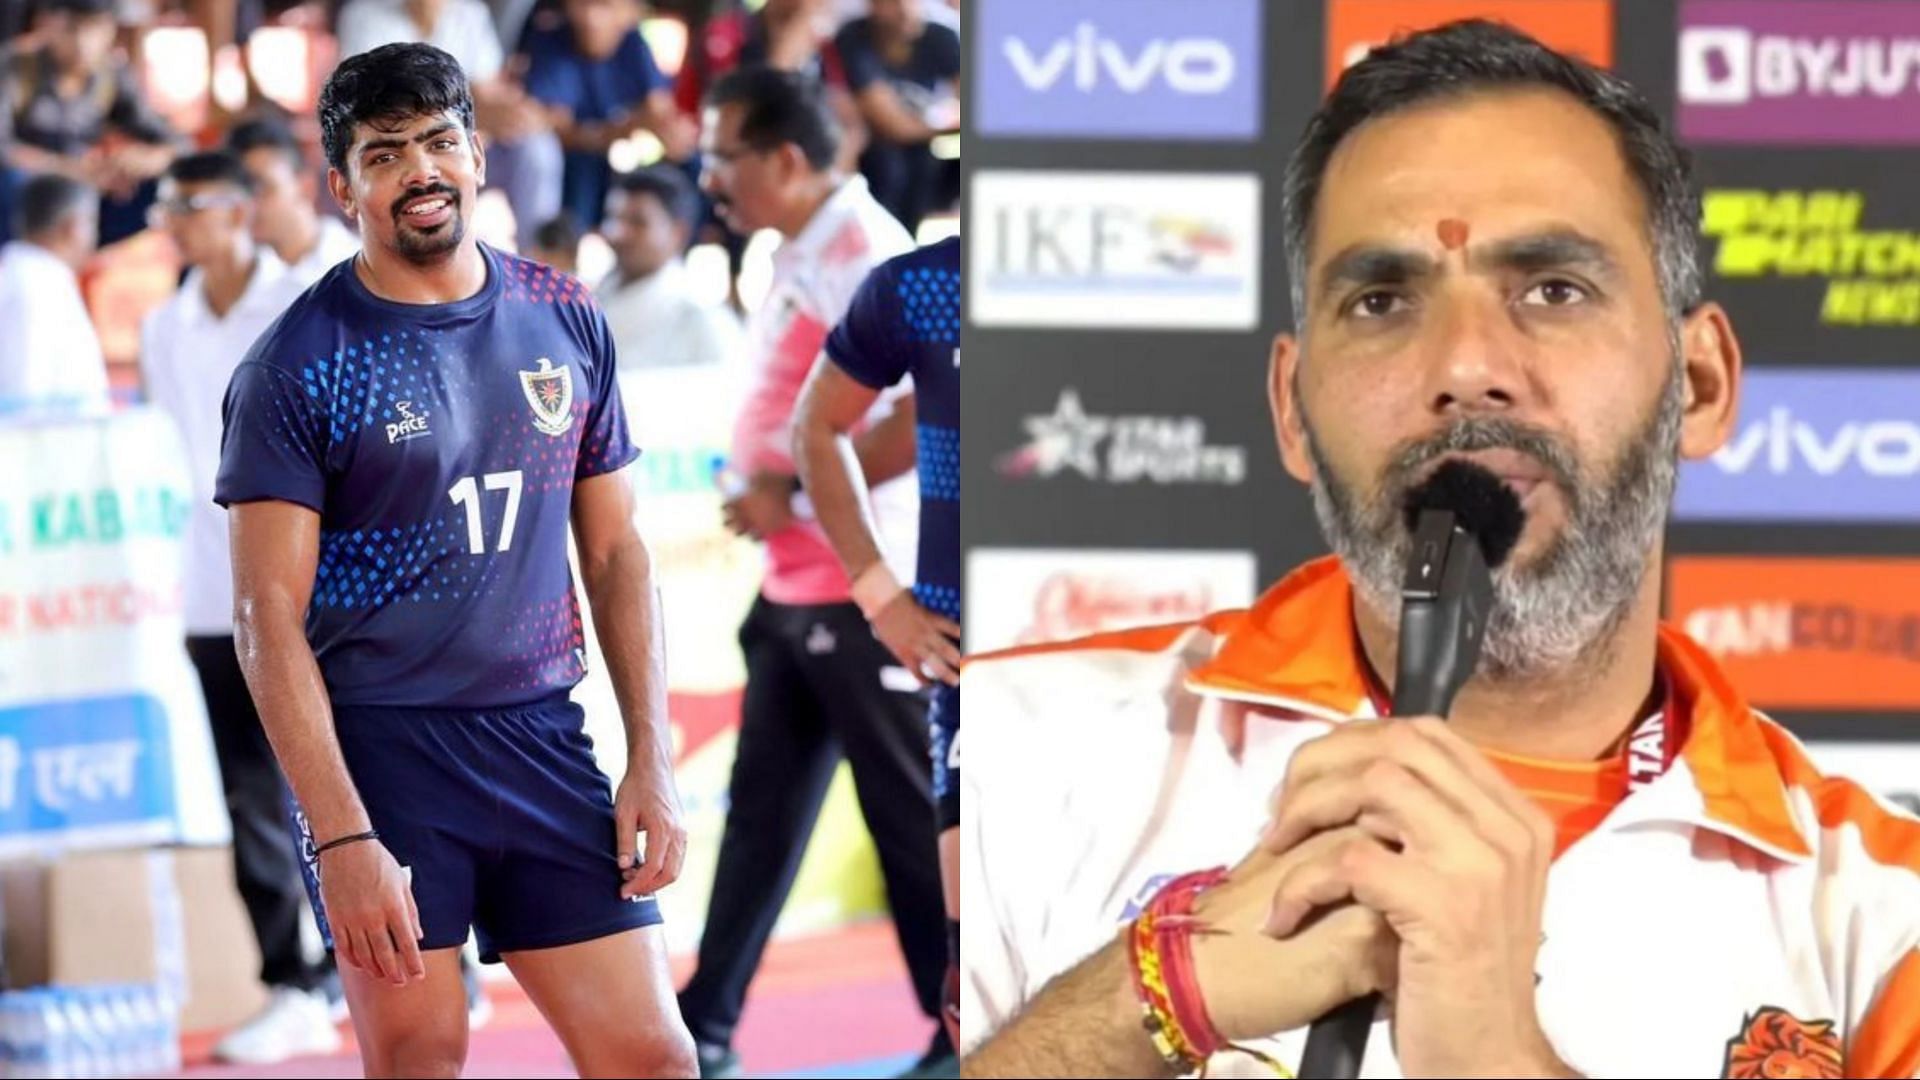 Anup Kumar thinks Pawan Sehrawat (L) will be the most sought-after player at the Pro Kabaddi Auction 2022 (Image: Instagram)